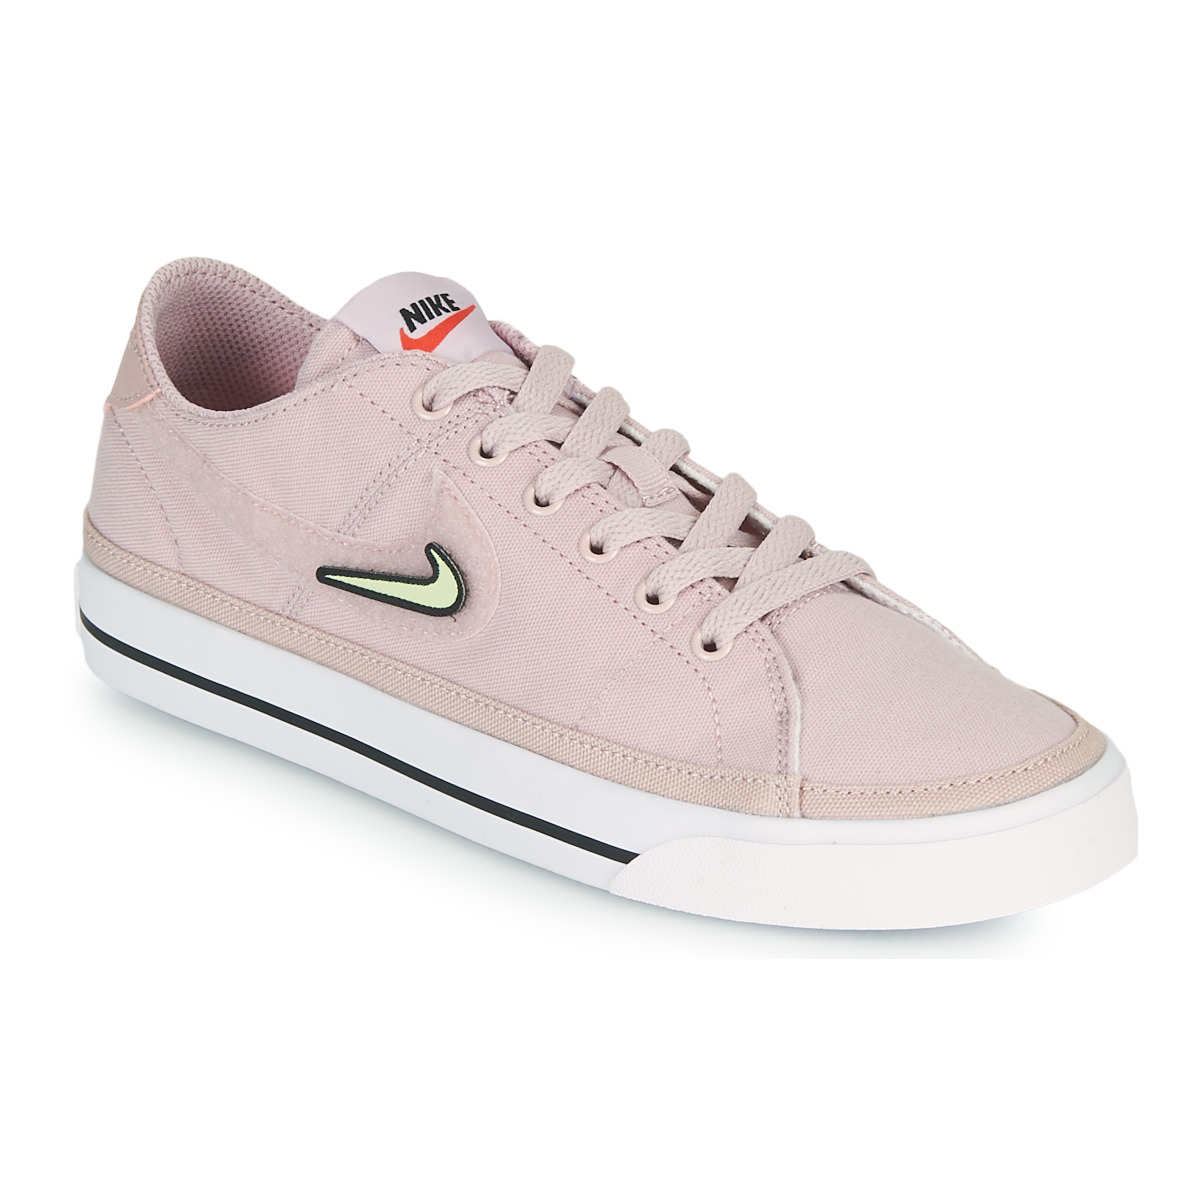 Nike COURT LEGACY VALENTINE S DAY 19008171 1200 A